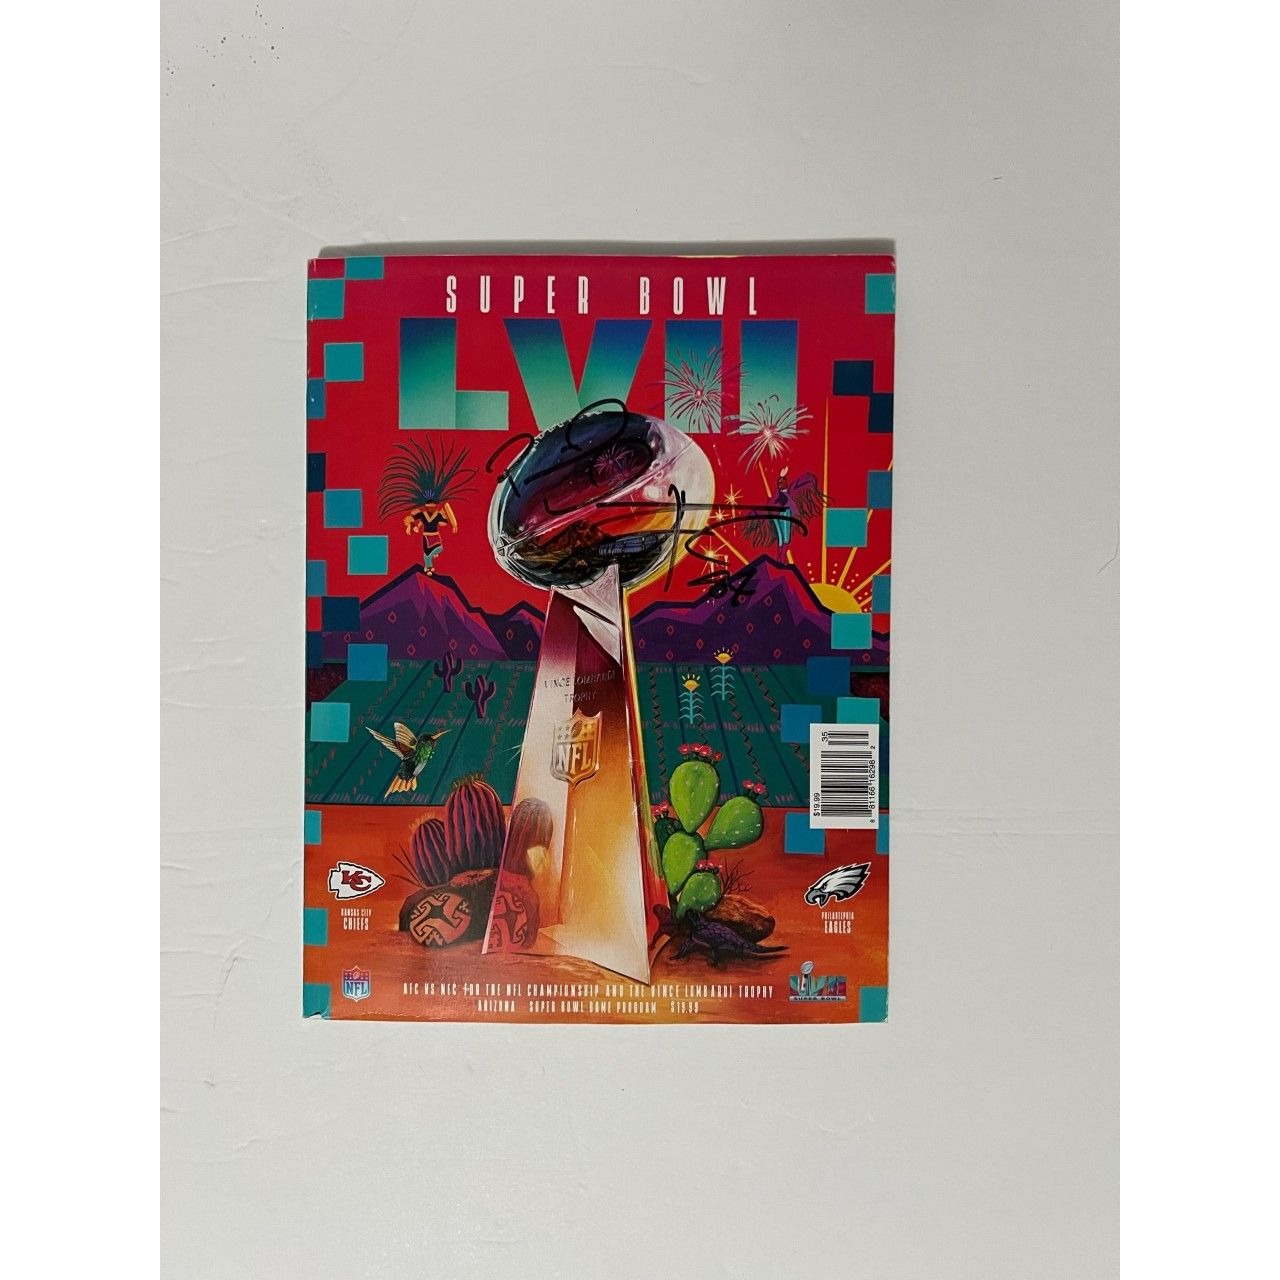 Super Bowl 57 official program Patrick Mahomes and Travis Kelce signed